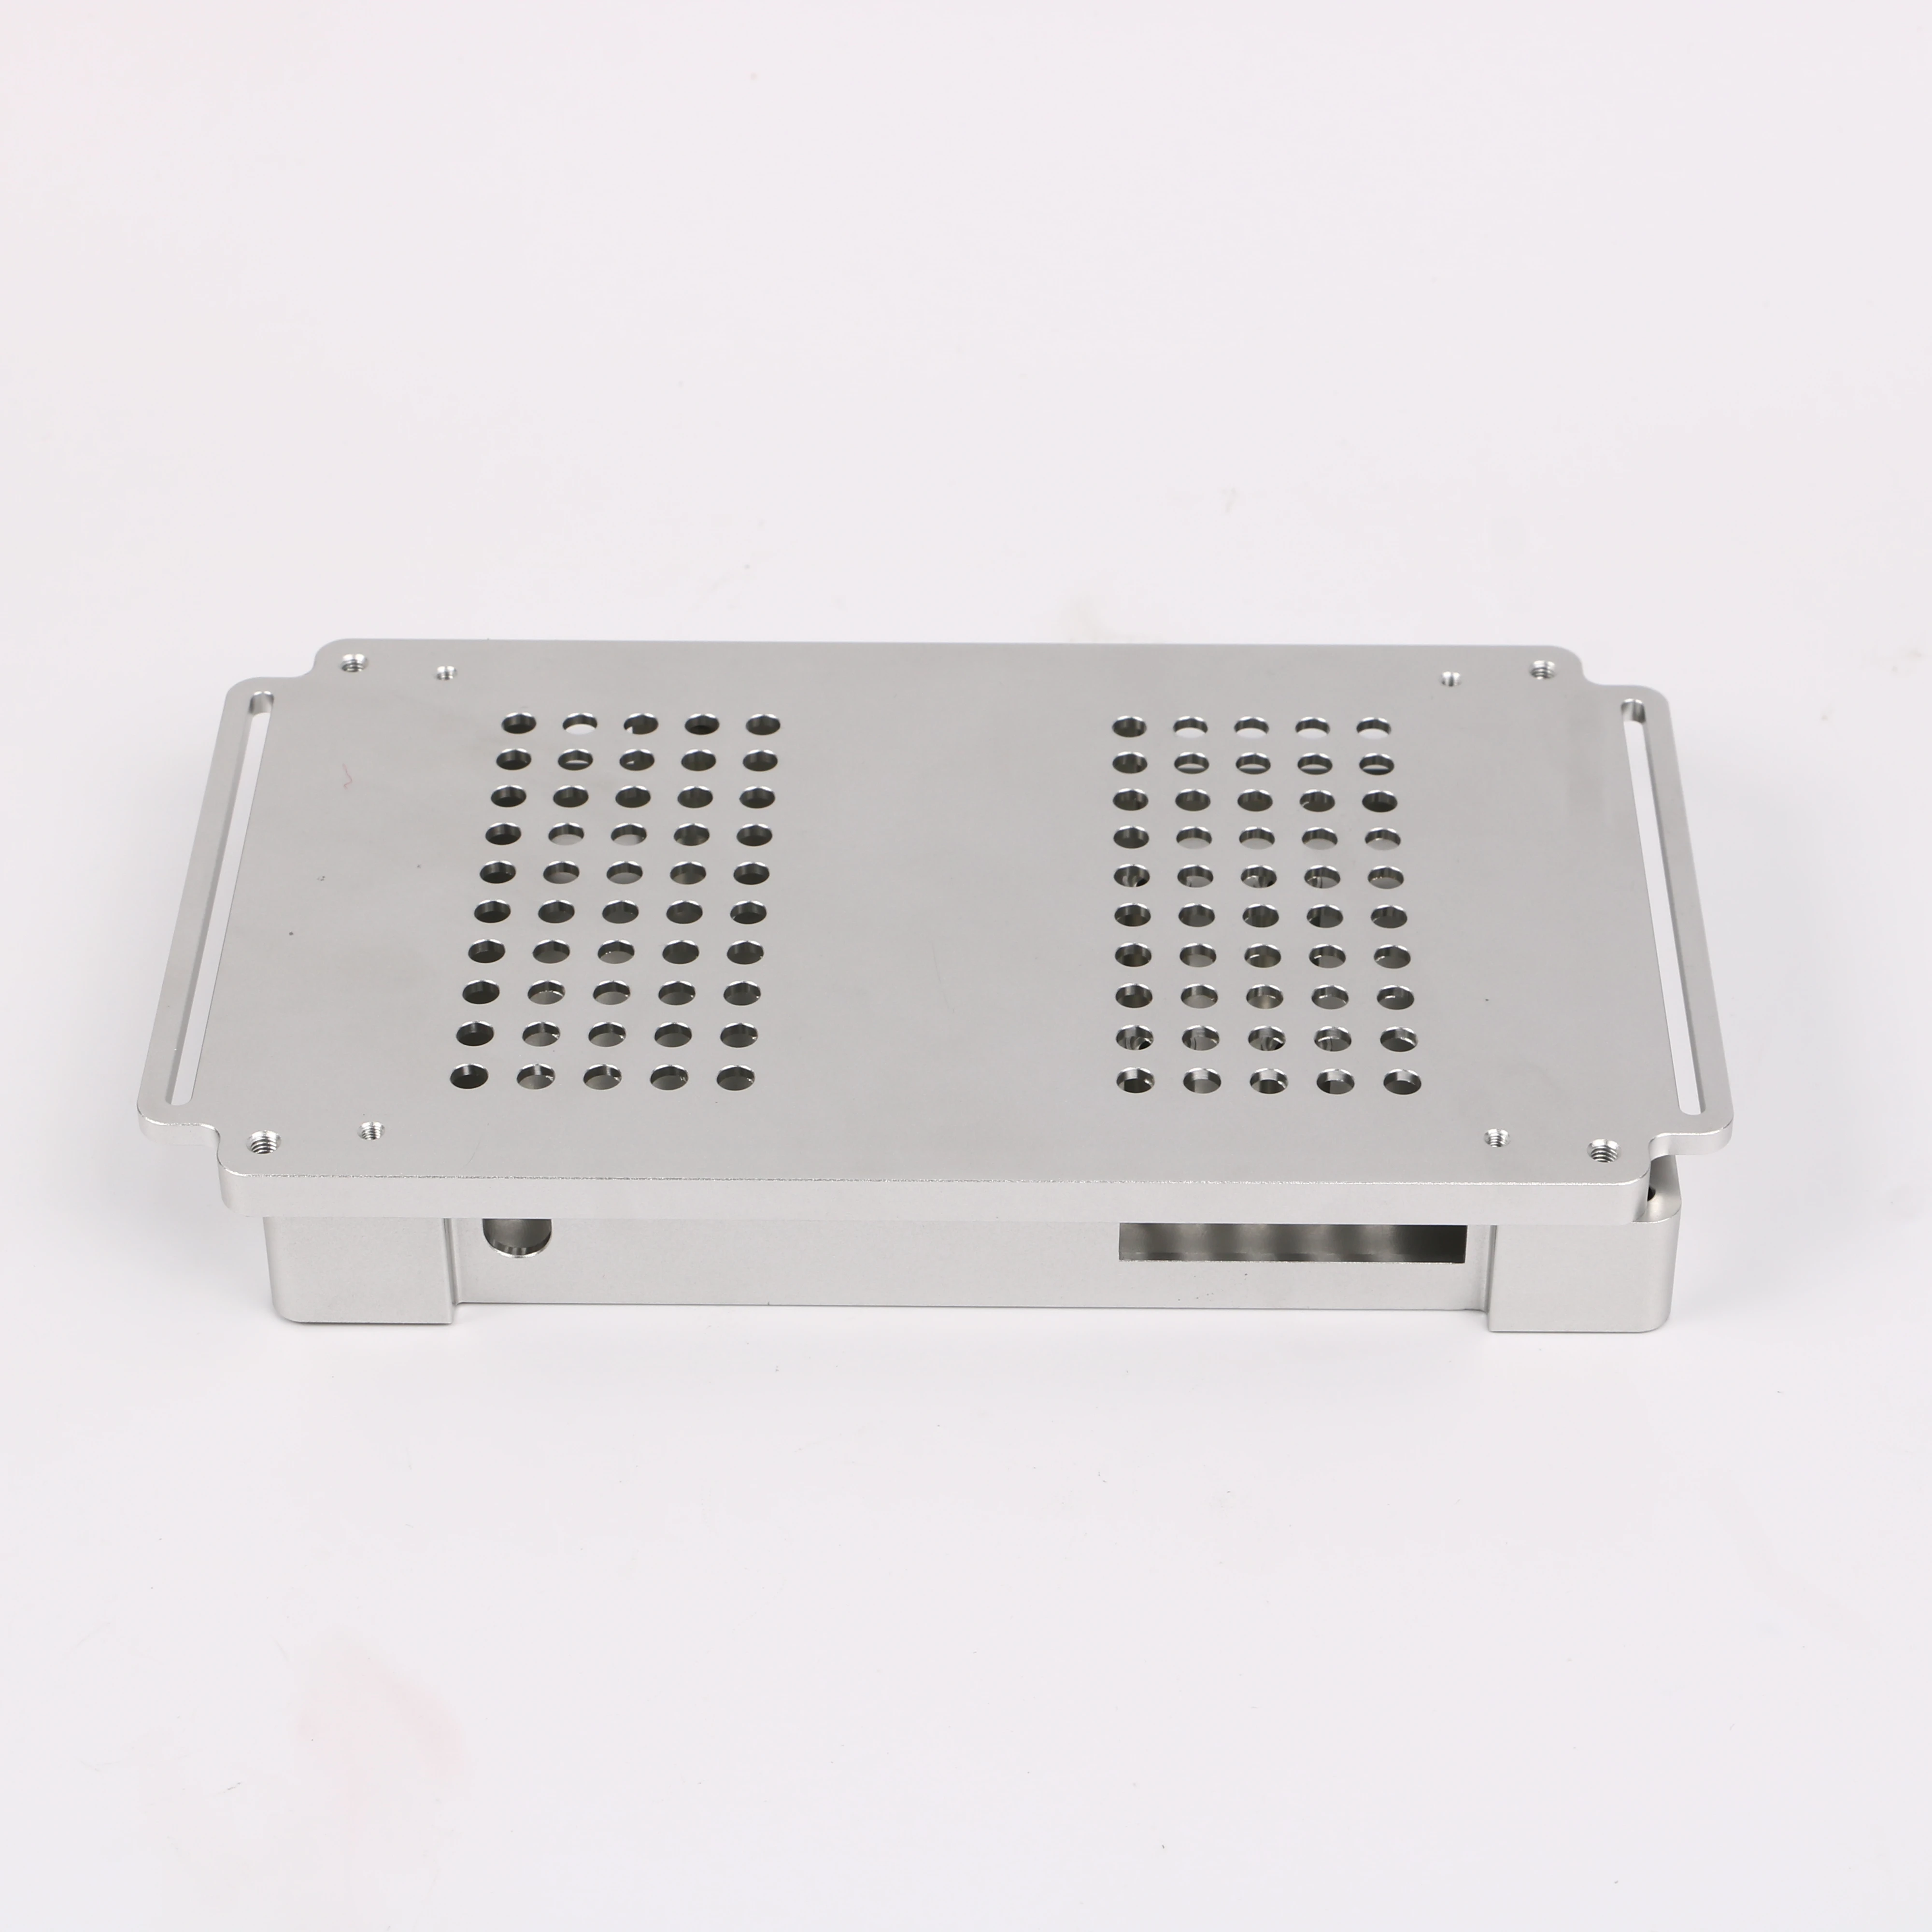 Custom cnc milling machining part precision electronic case part industrial fabrication stainless steel housing